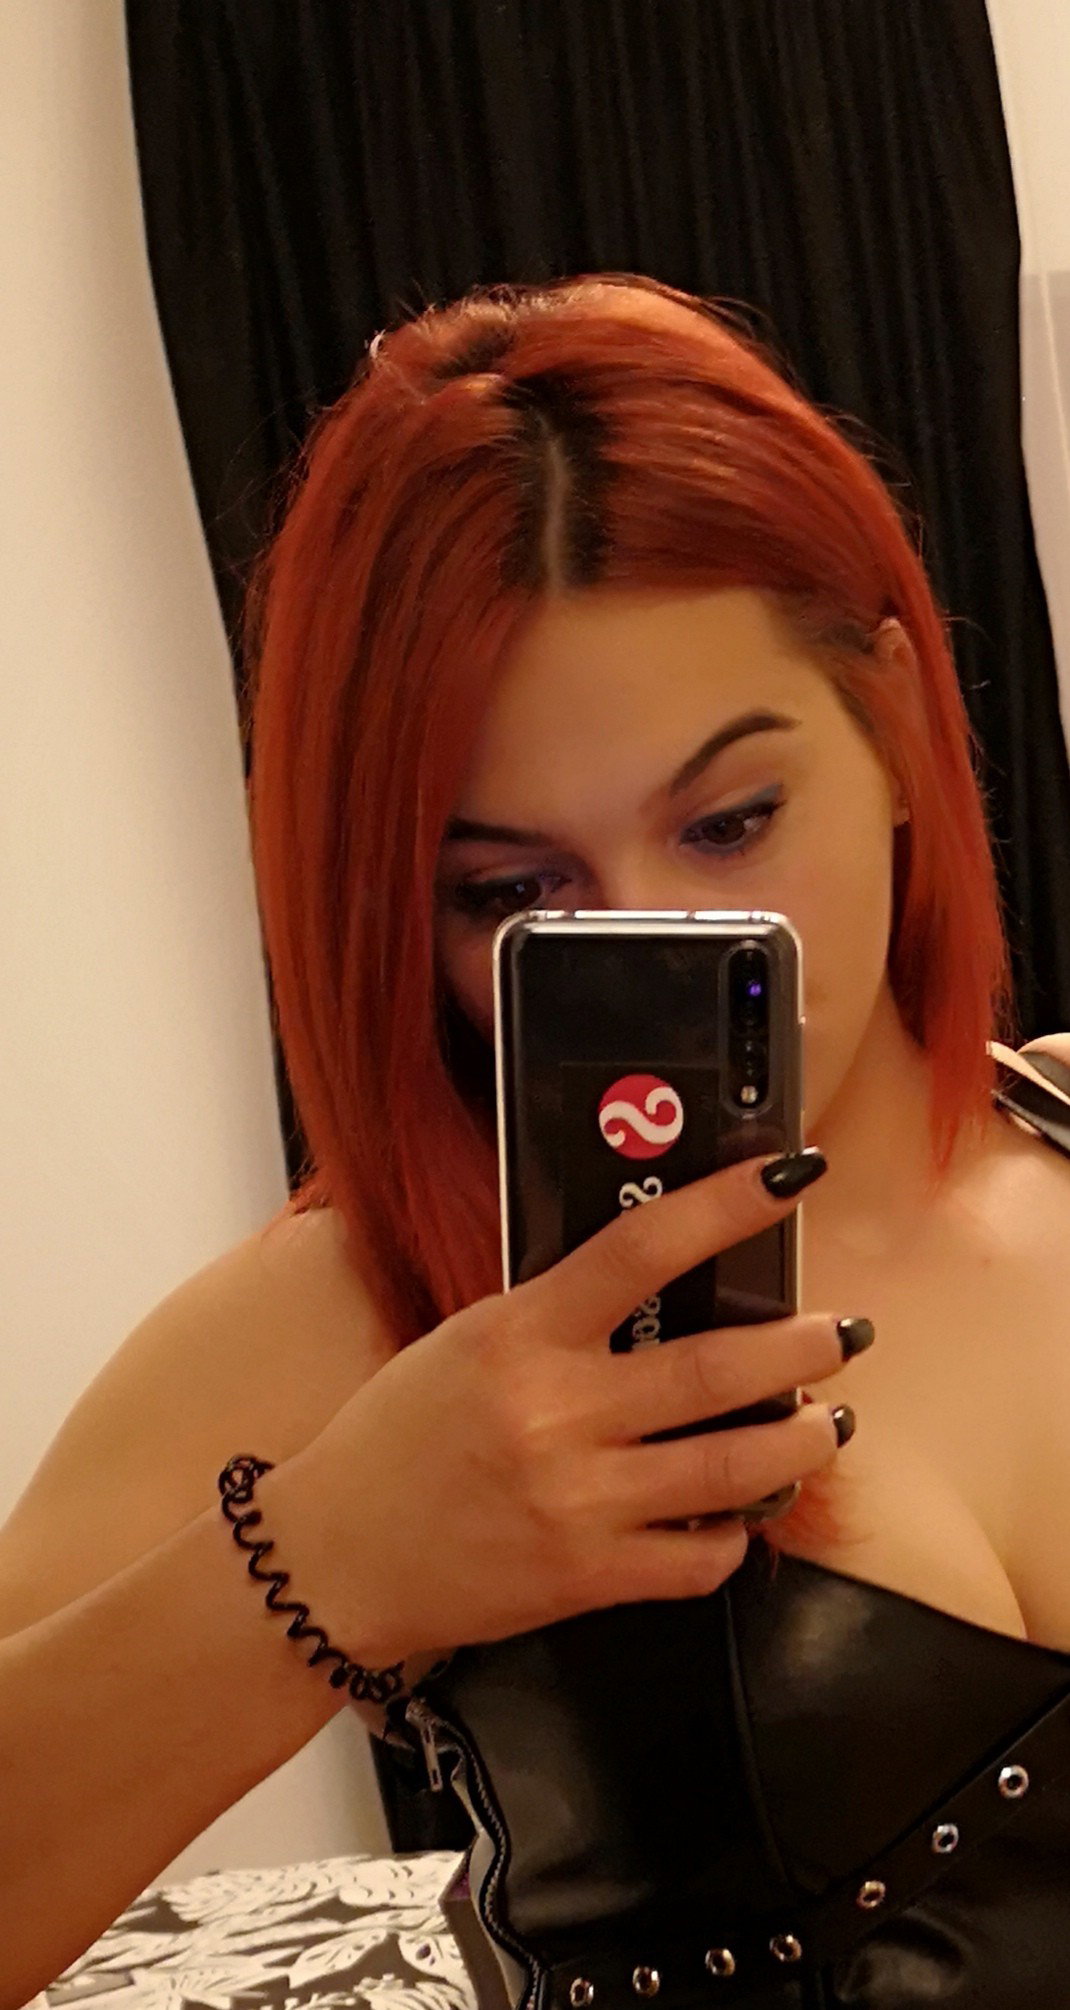 Photo by Gia Chains with the username @GiaChains, who is a star user,  January 7, 2019 at 5:29 PM. The post is about the topic Amateurs and the text says '#sharesome #FlameToken #onlyfans #Xhamster #pornhub #Xvideos #ManyVids #instagram'